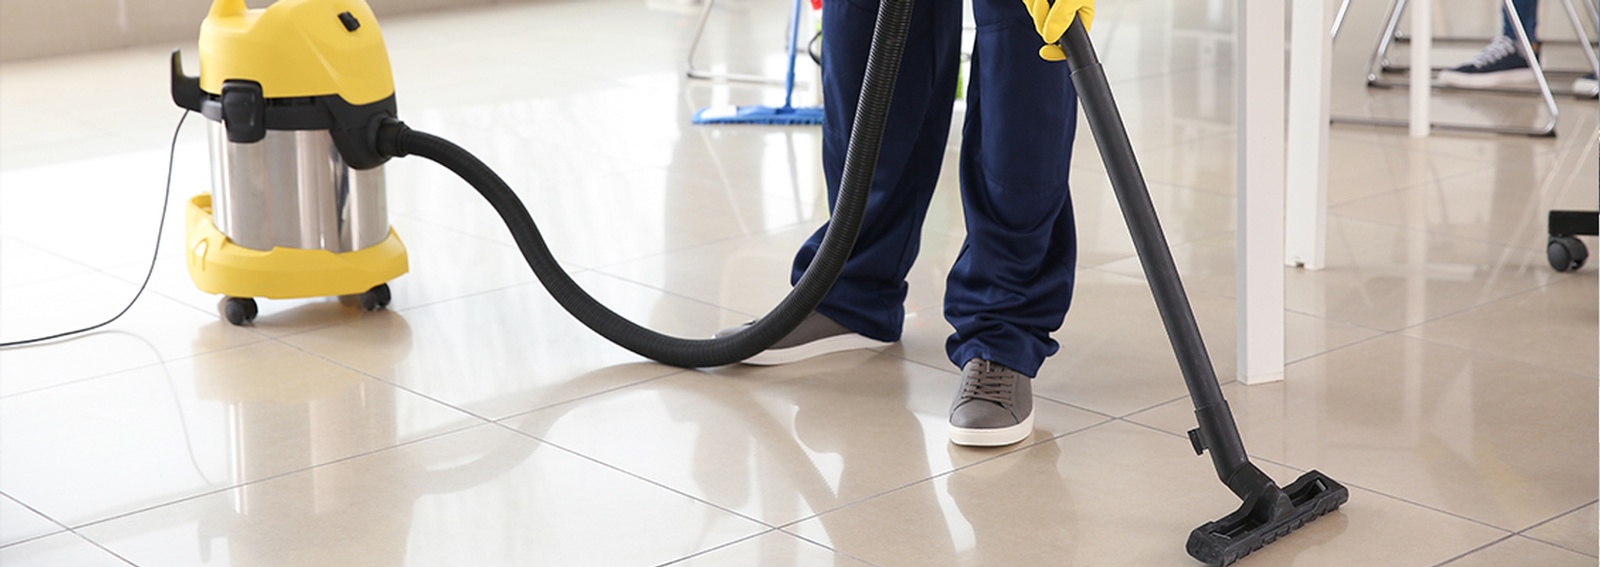 Building Cleaning Services - Commercial Office Cleaning Company In Dallas by AcoStar Cleaning